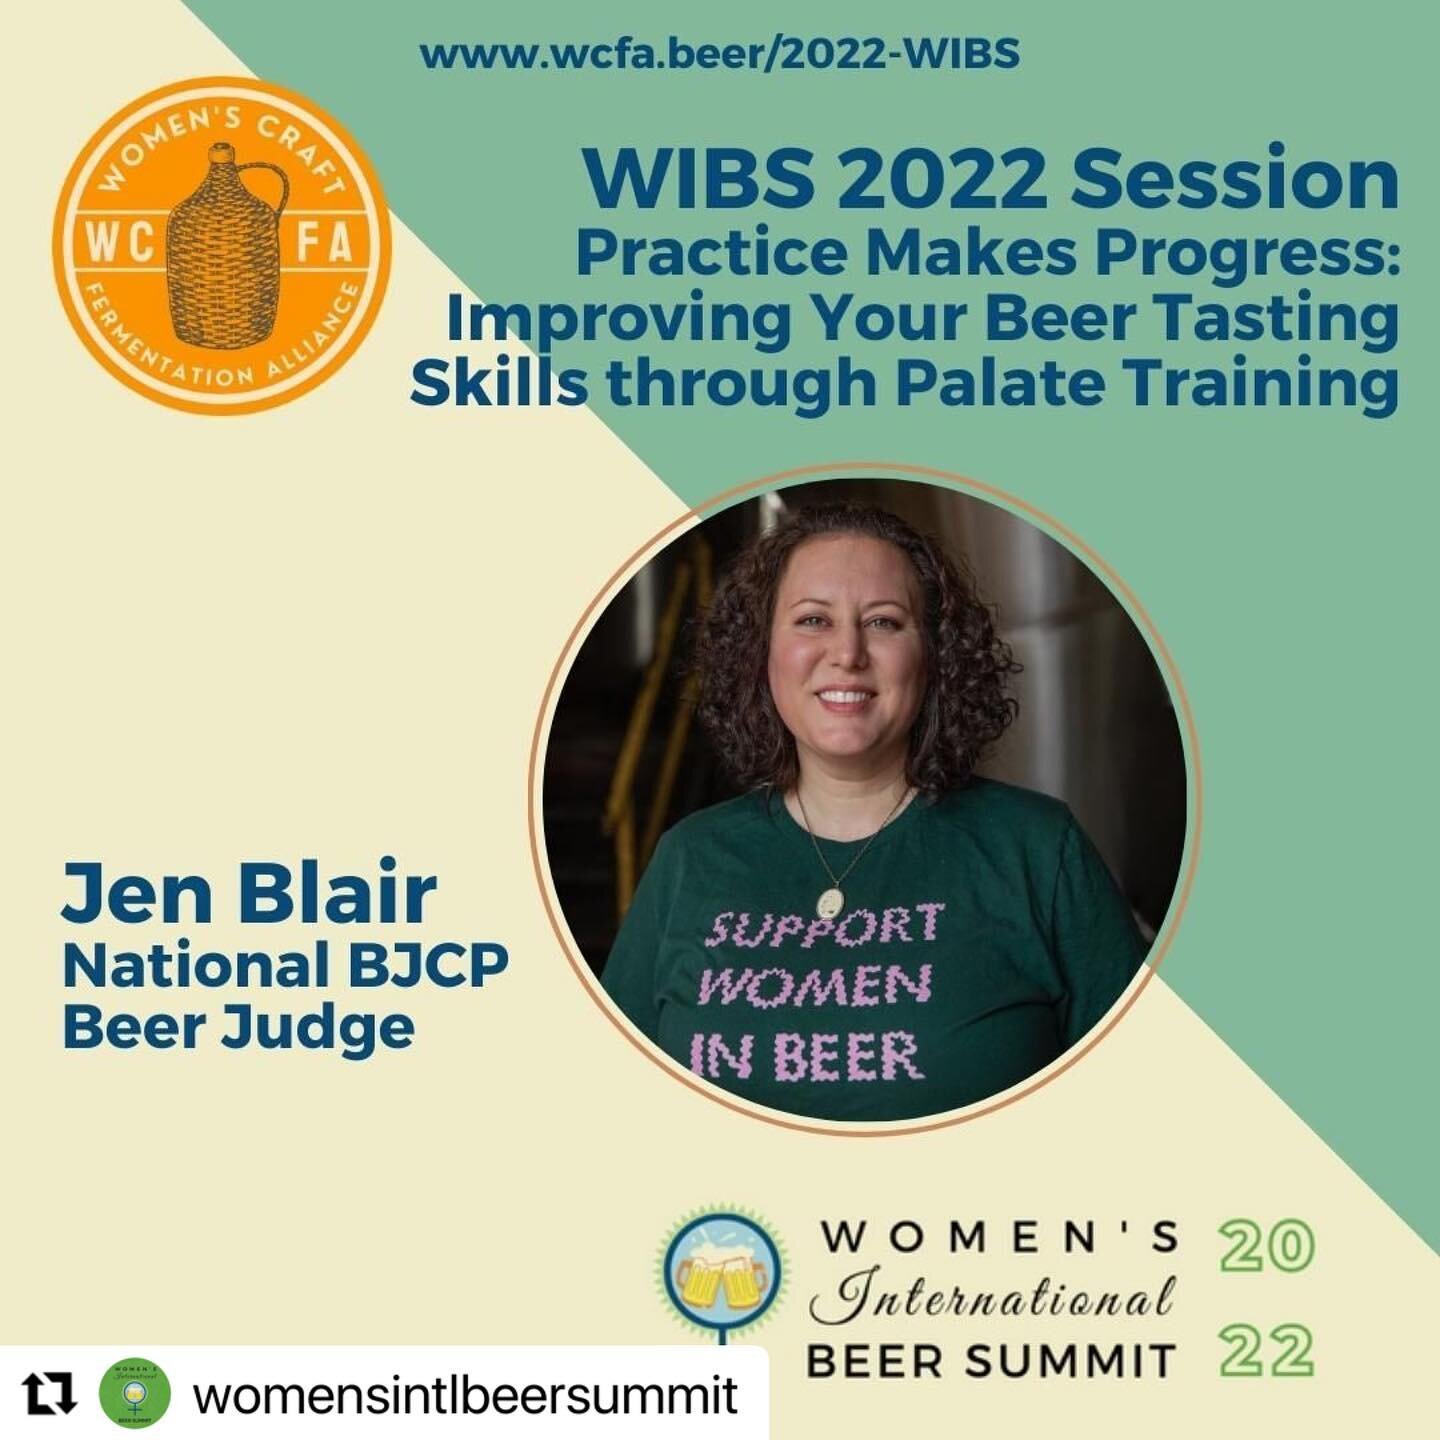 Mark your calendars for April 23rd! I am super stoked about this session!

#Repost @womensintlbeersummit with @make_repost
・・・
#WIBS2022 Session: Practice Makes Progress: Improving Your Beer Tasting Skills through Palate Training with Jen Blair (@und